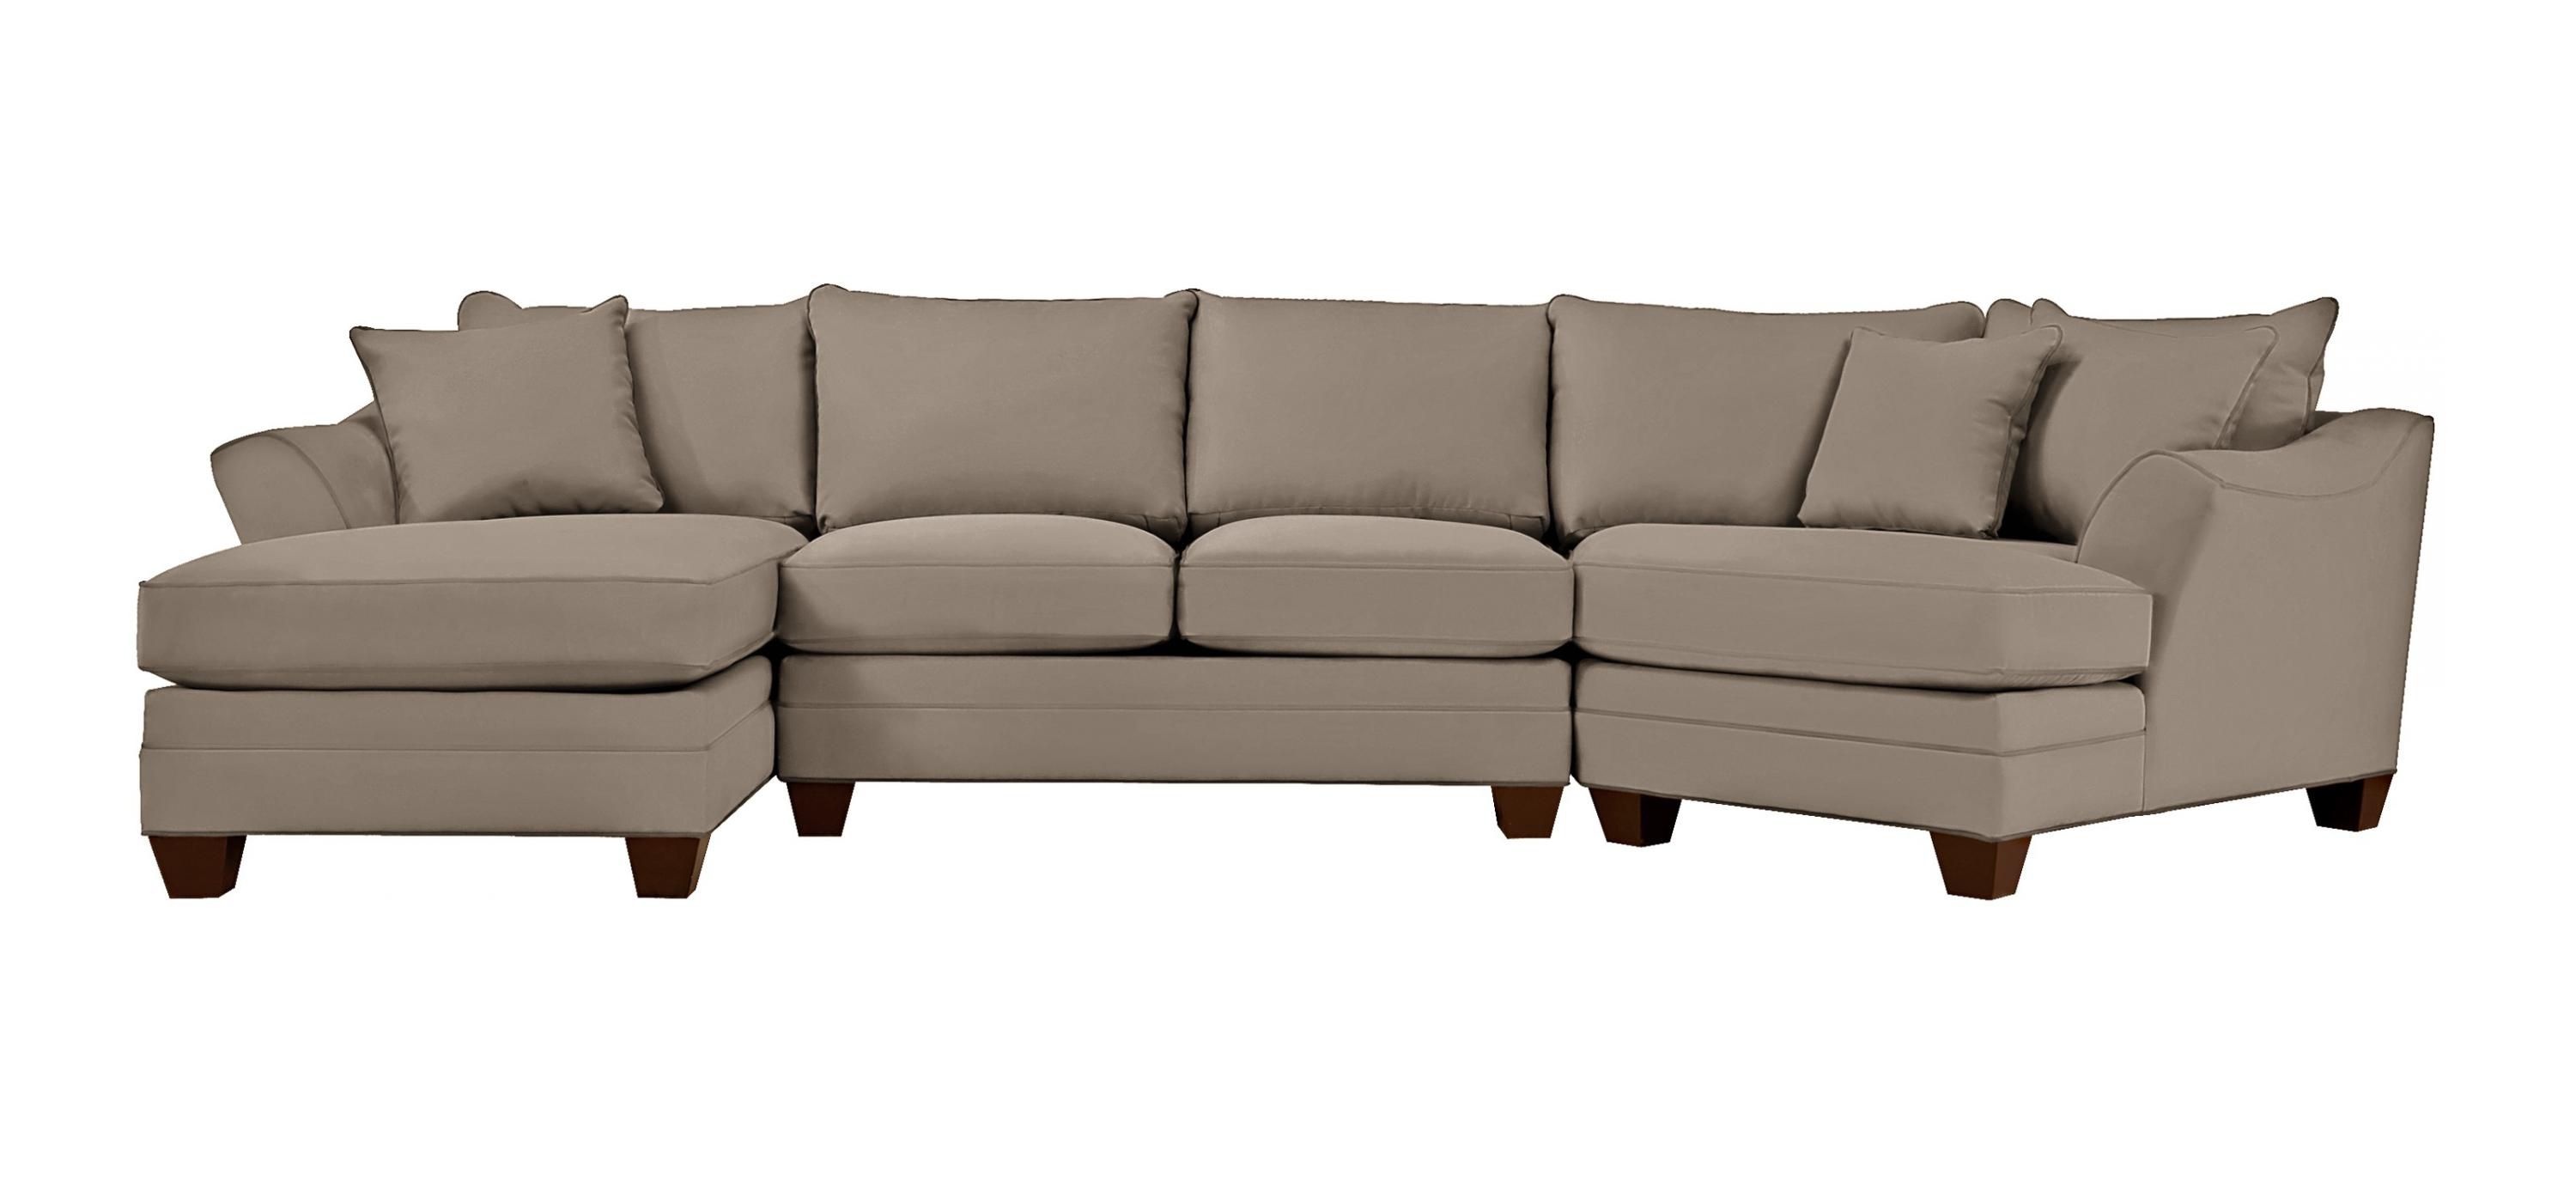 Foresthill 3-pc. Left Hand Facing Microfiber Sectional Sofa